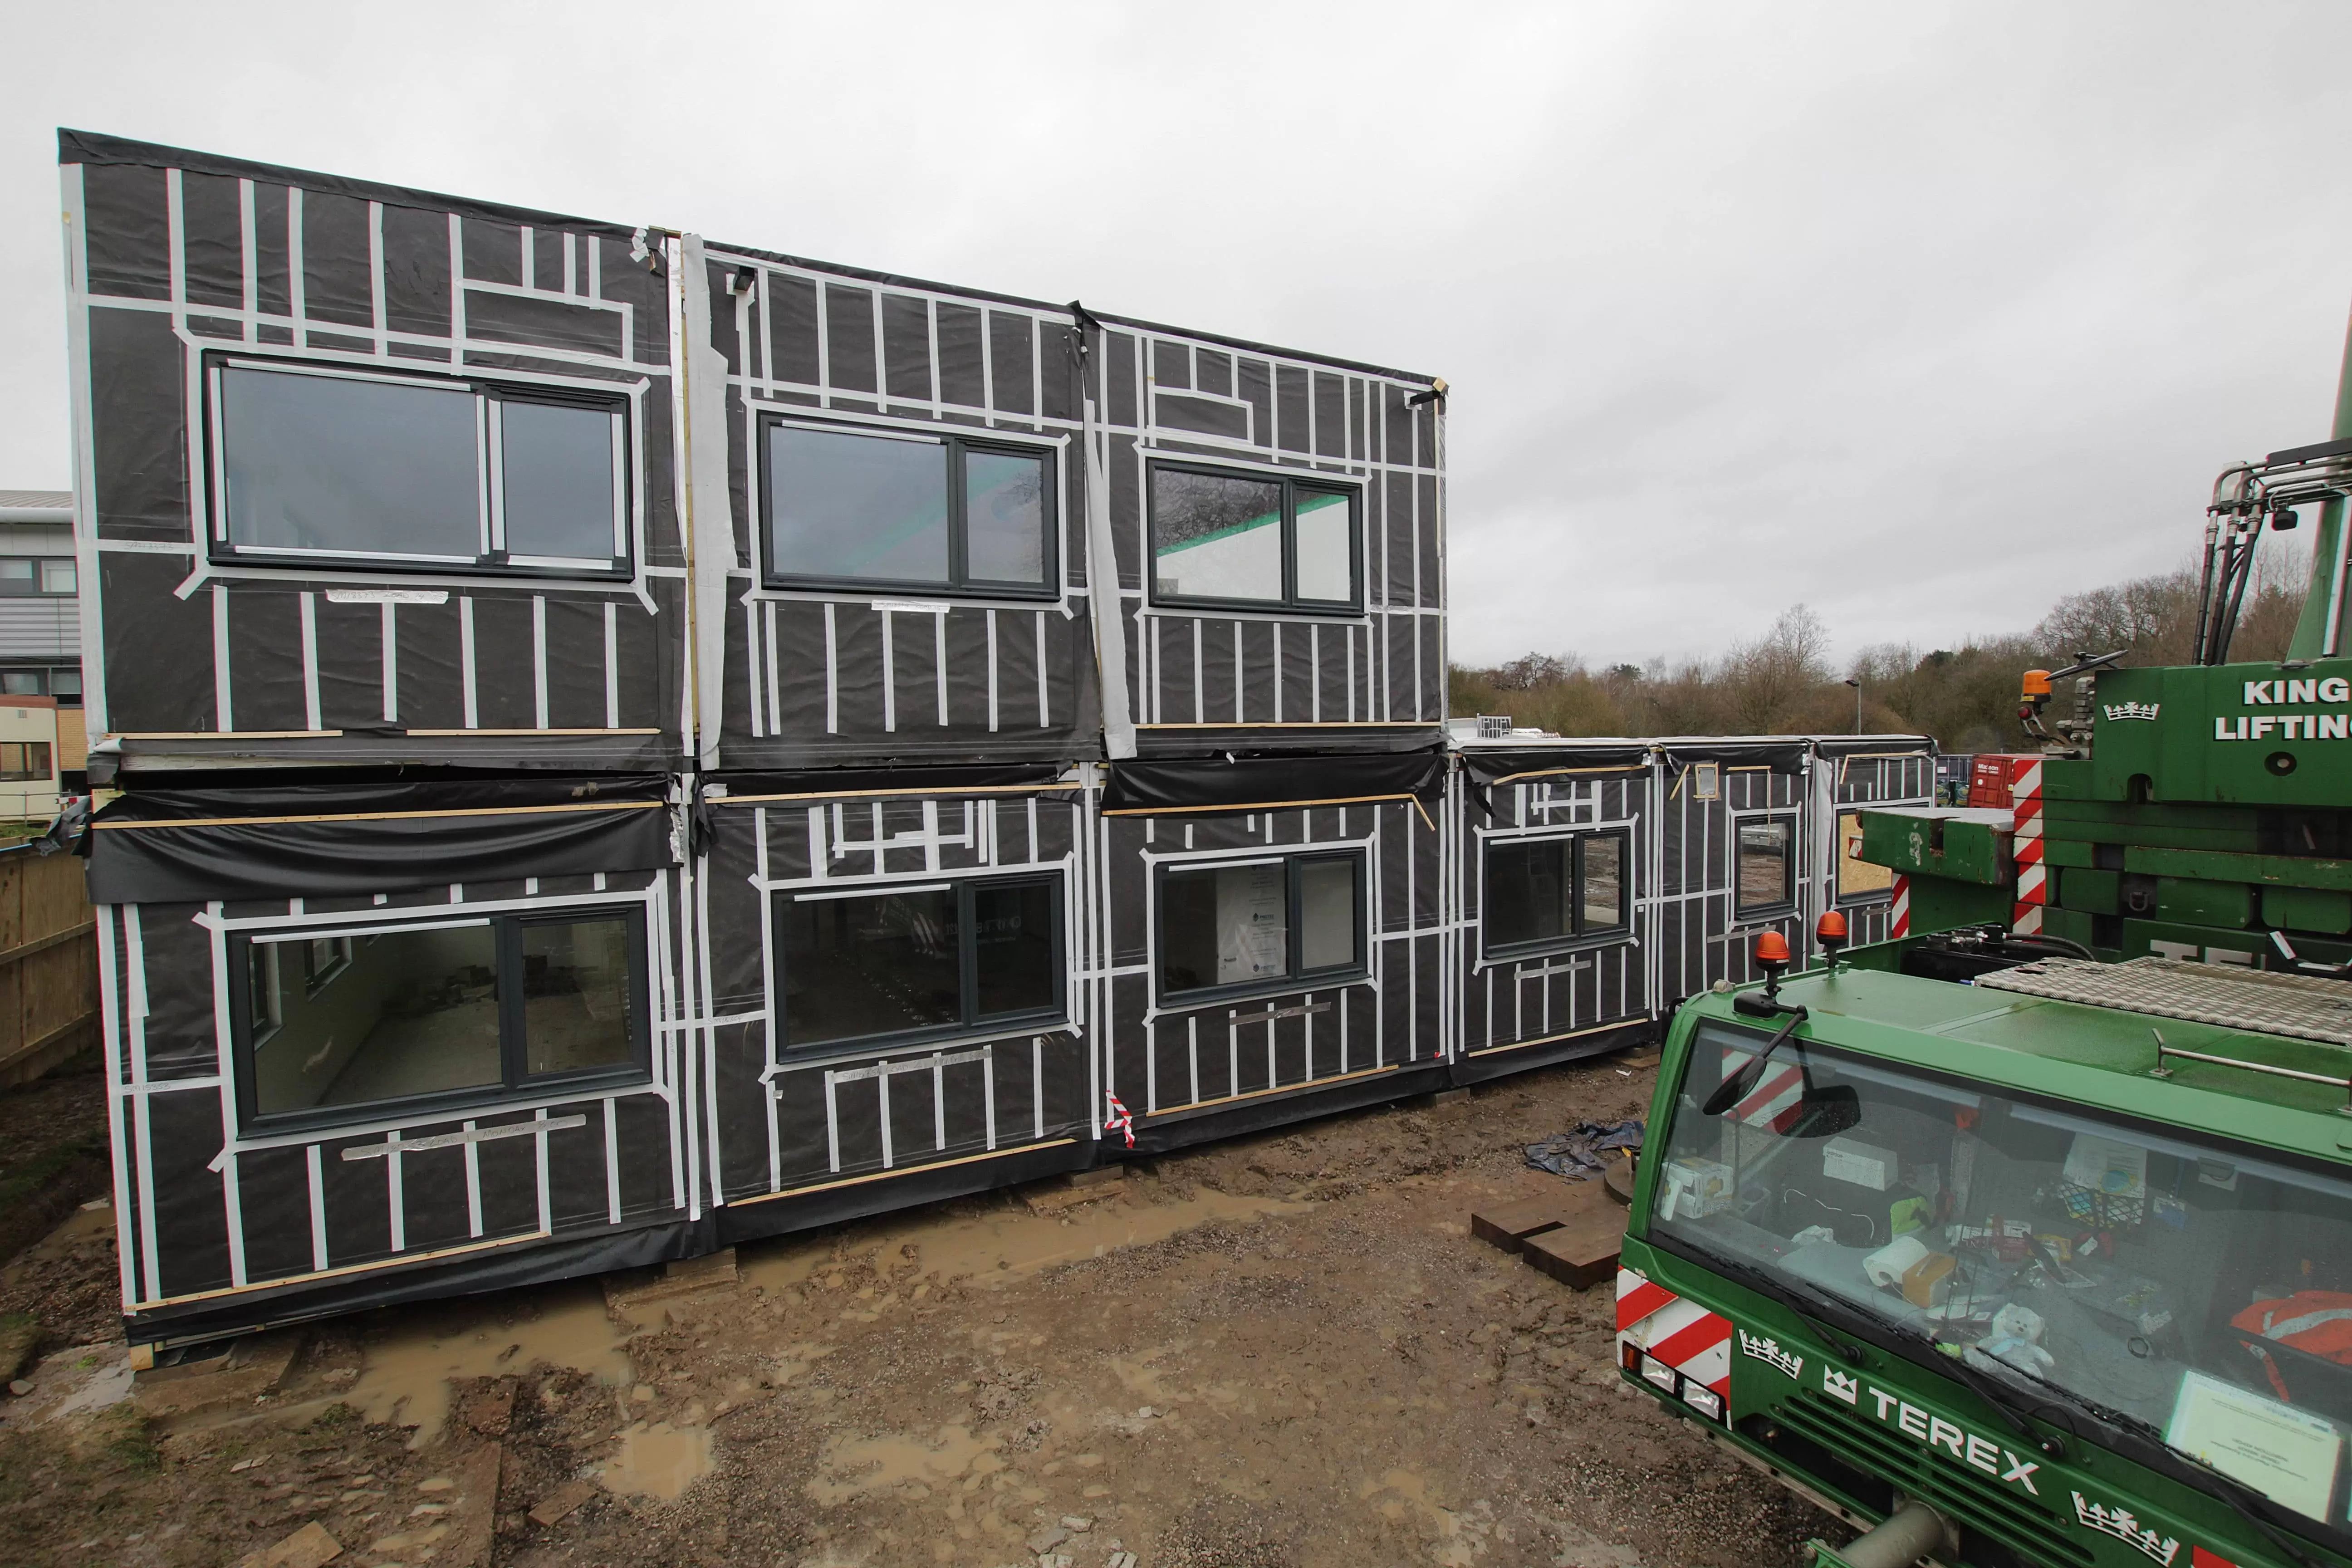 Capturing a new education facility in Solihull for Modulek